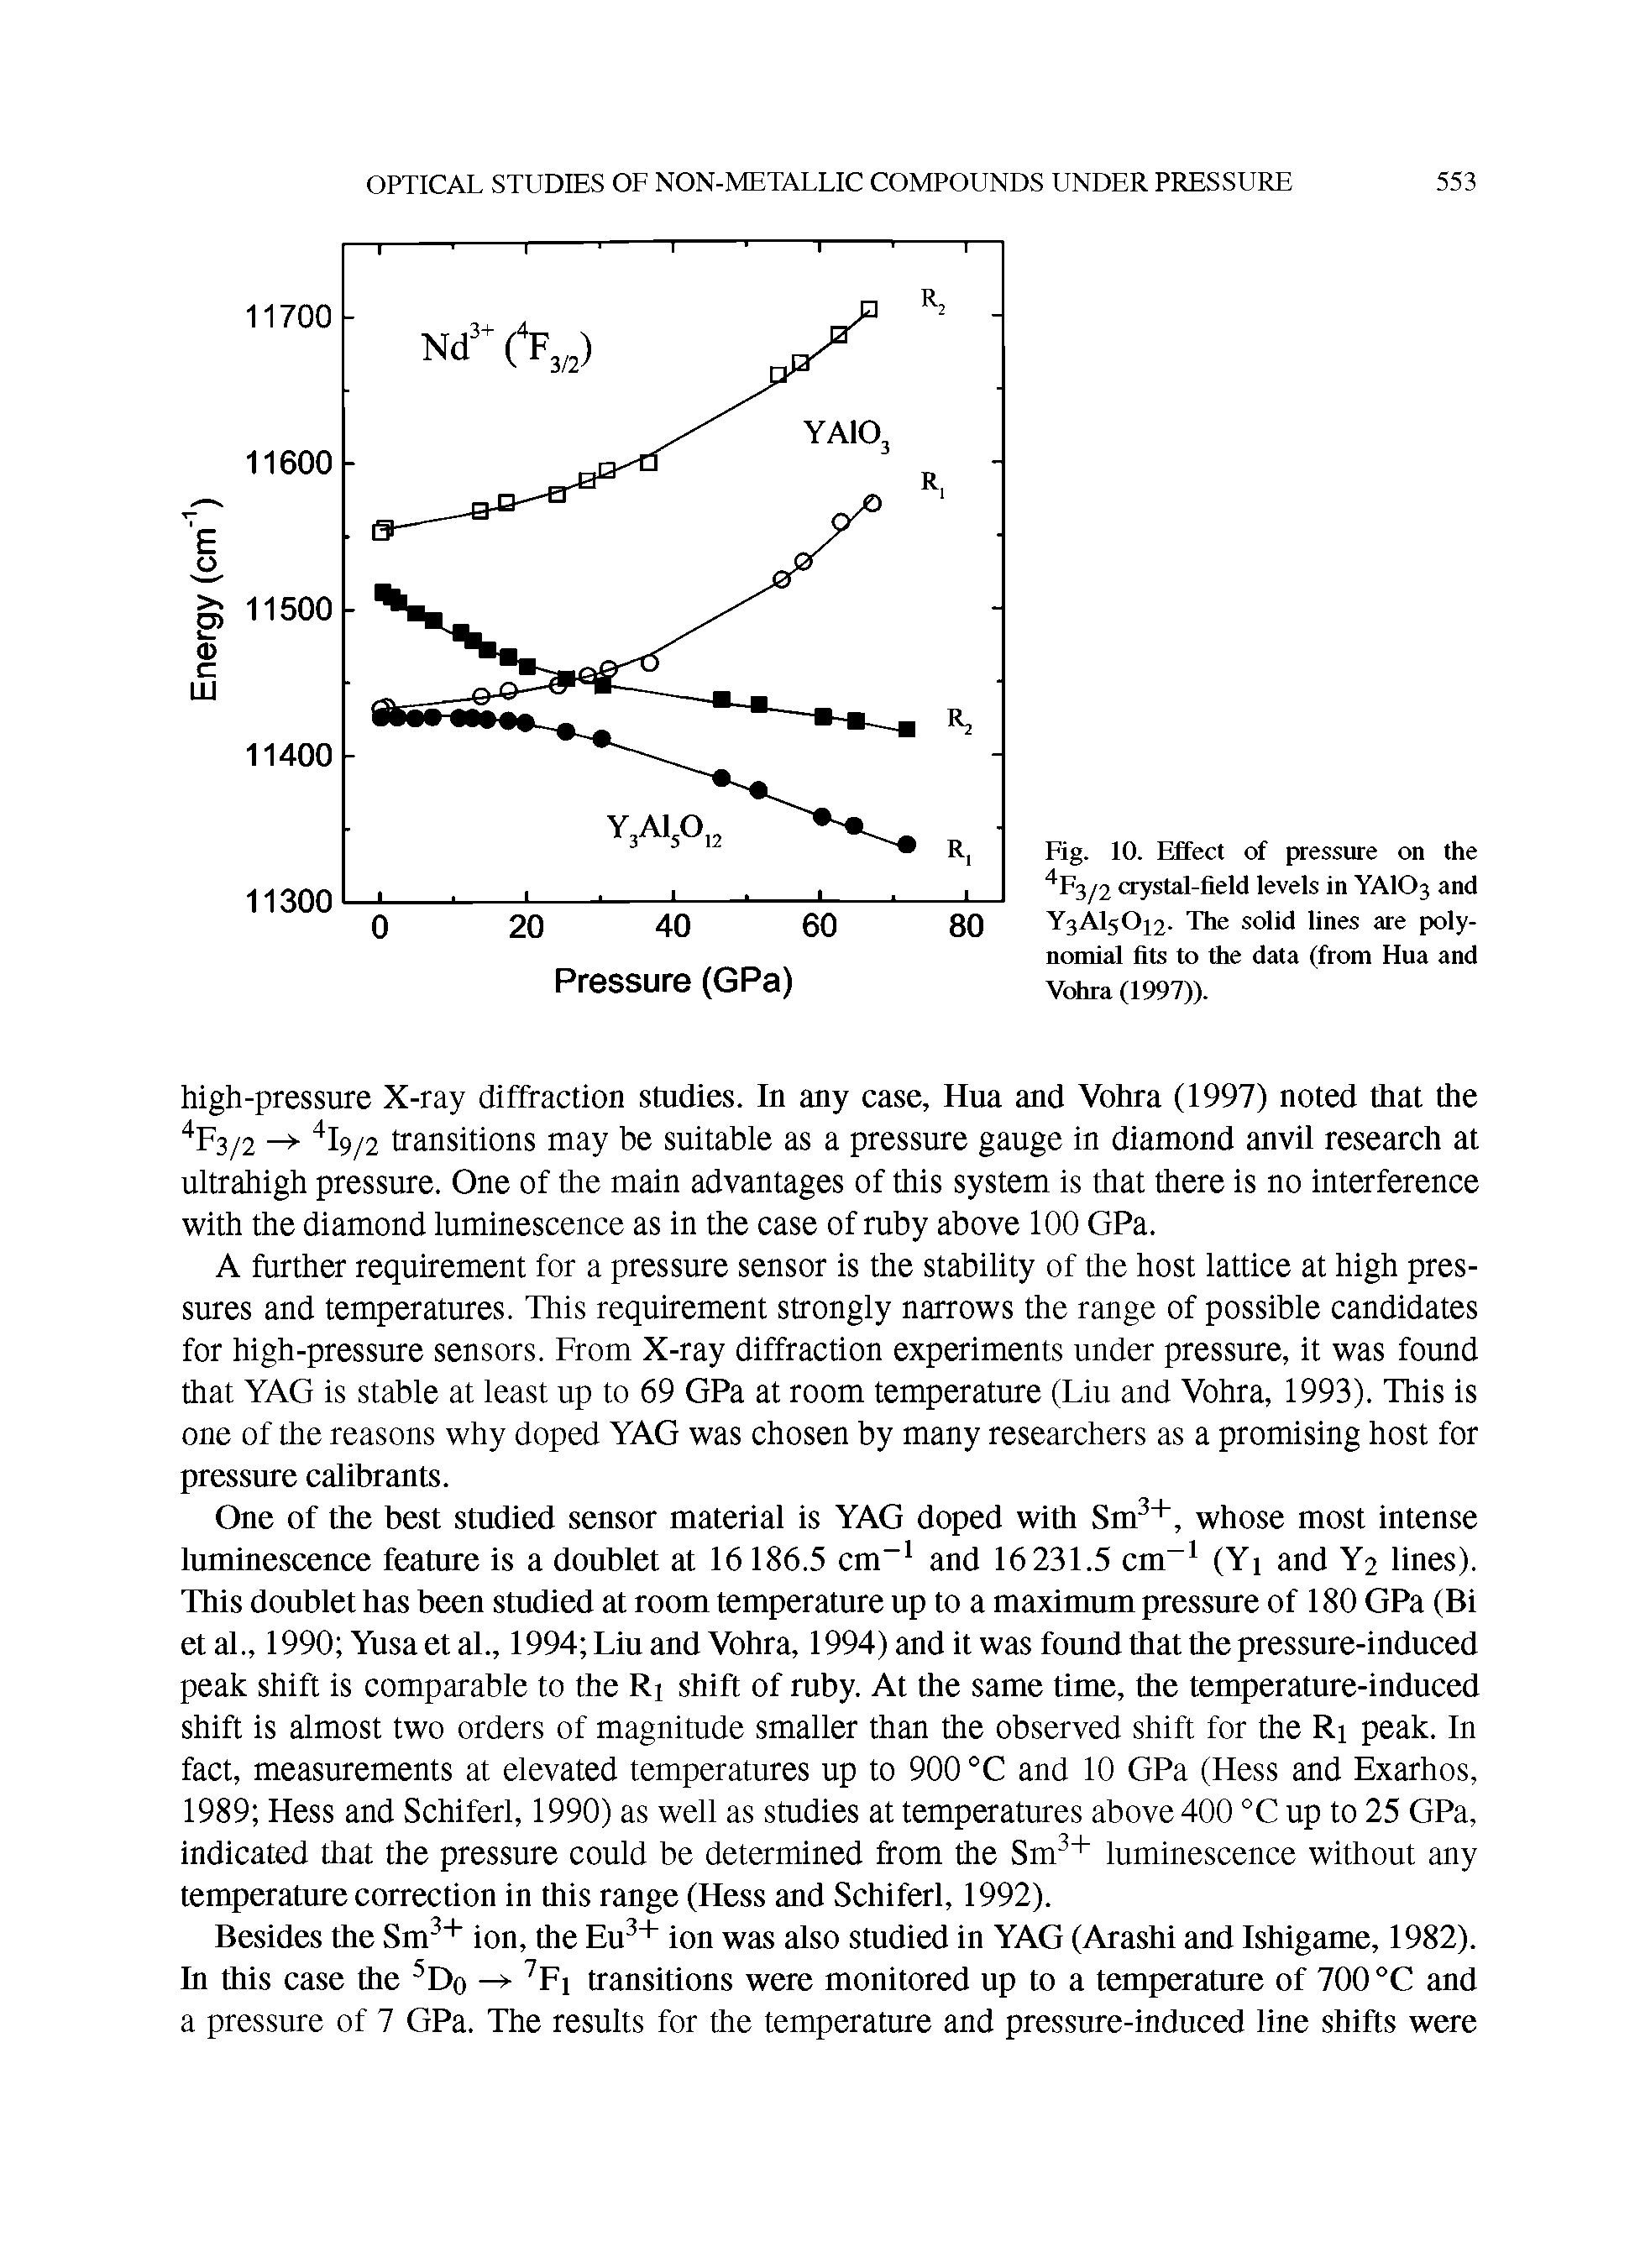 Fig. 10. Effect of pressure on the 4F3/2 crystal-field levels in YAIO3 and Y3AI5O12- The solid lines are polynomial fits to the data (from Hua and Vohra (1997)).